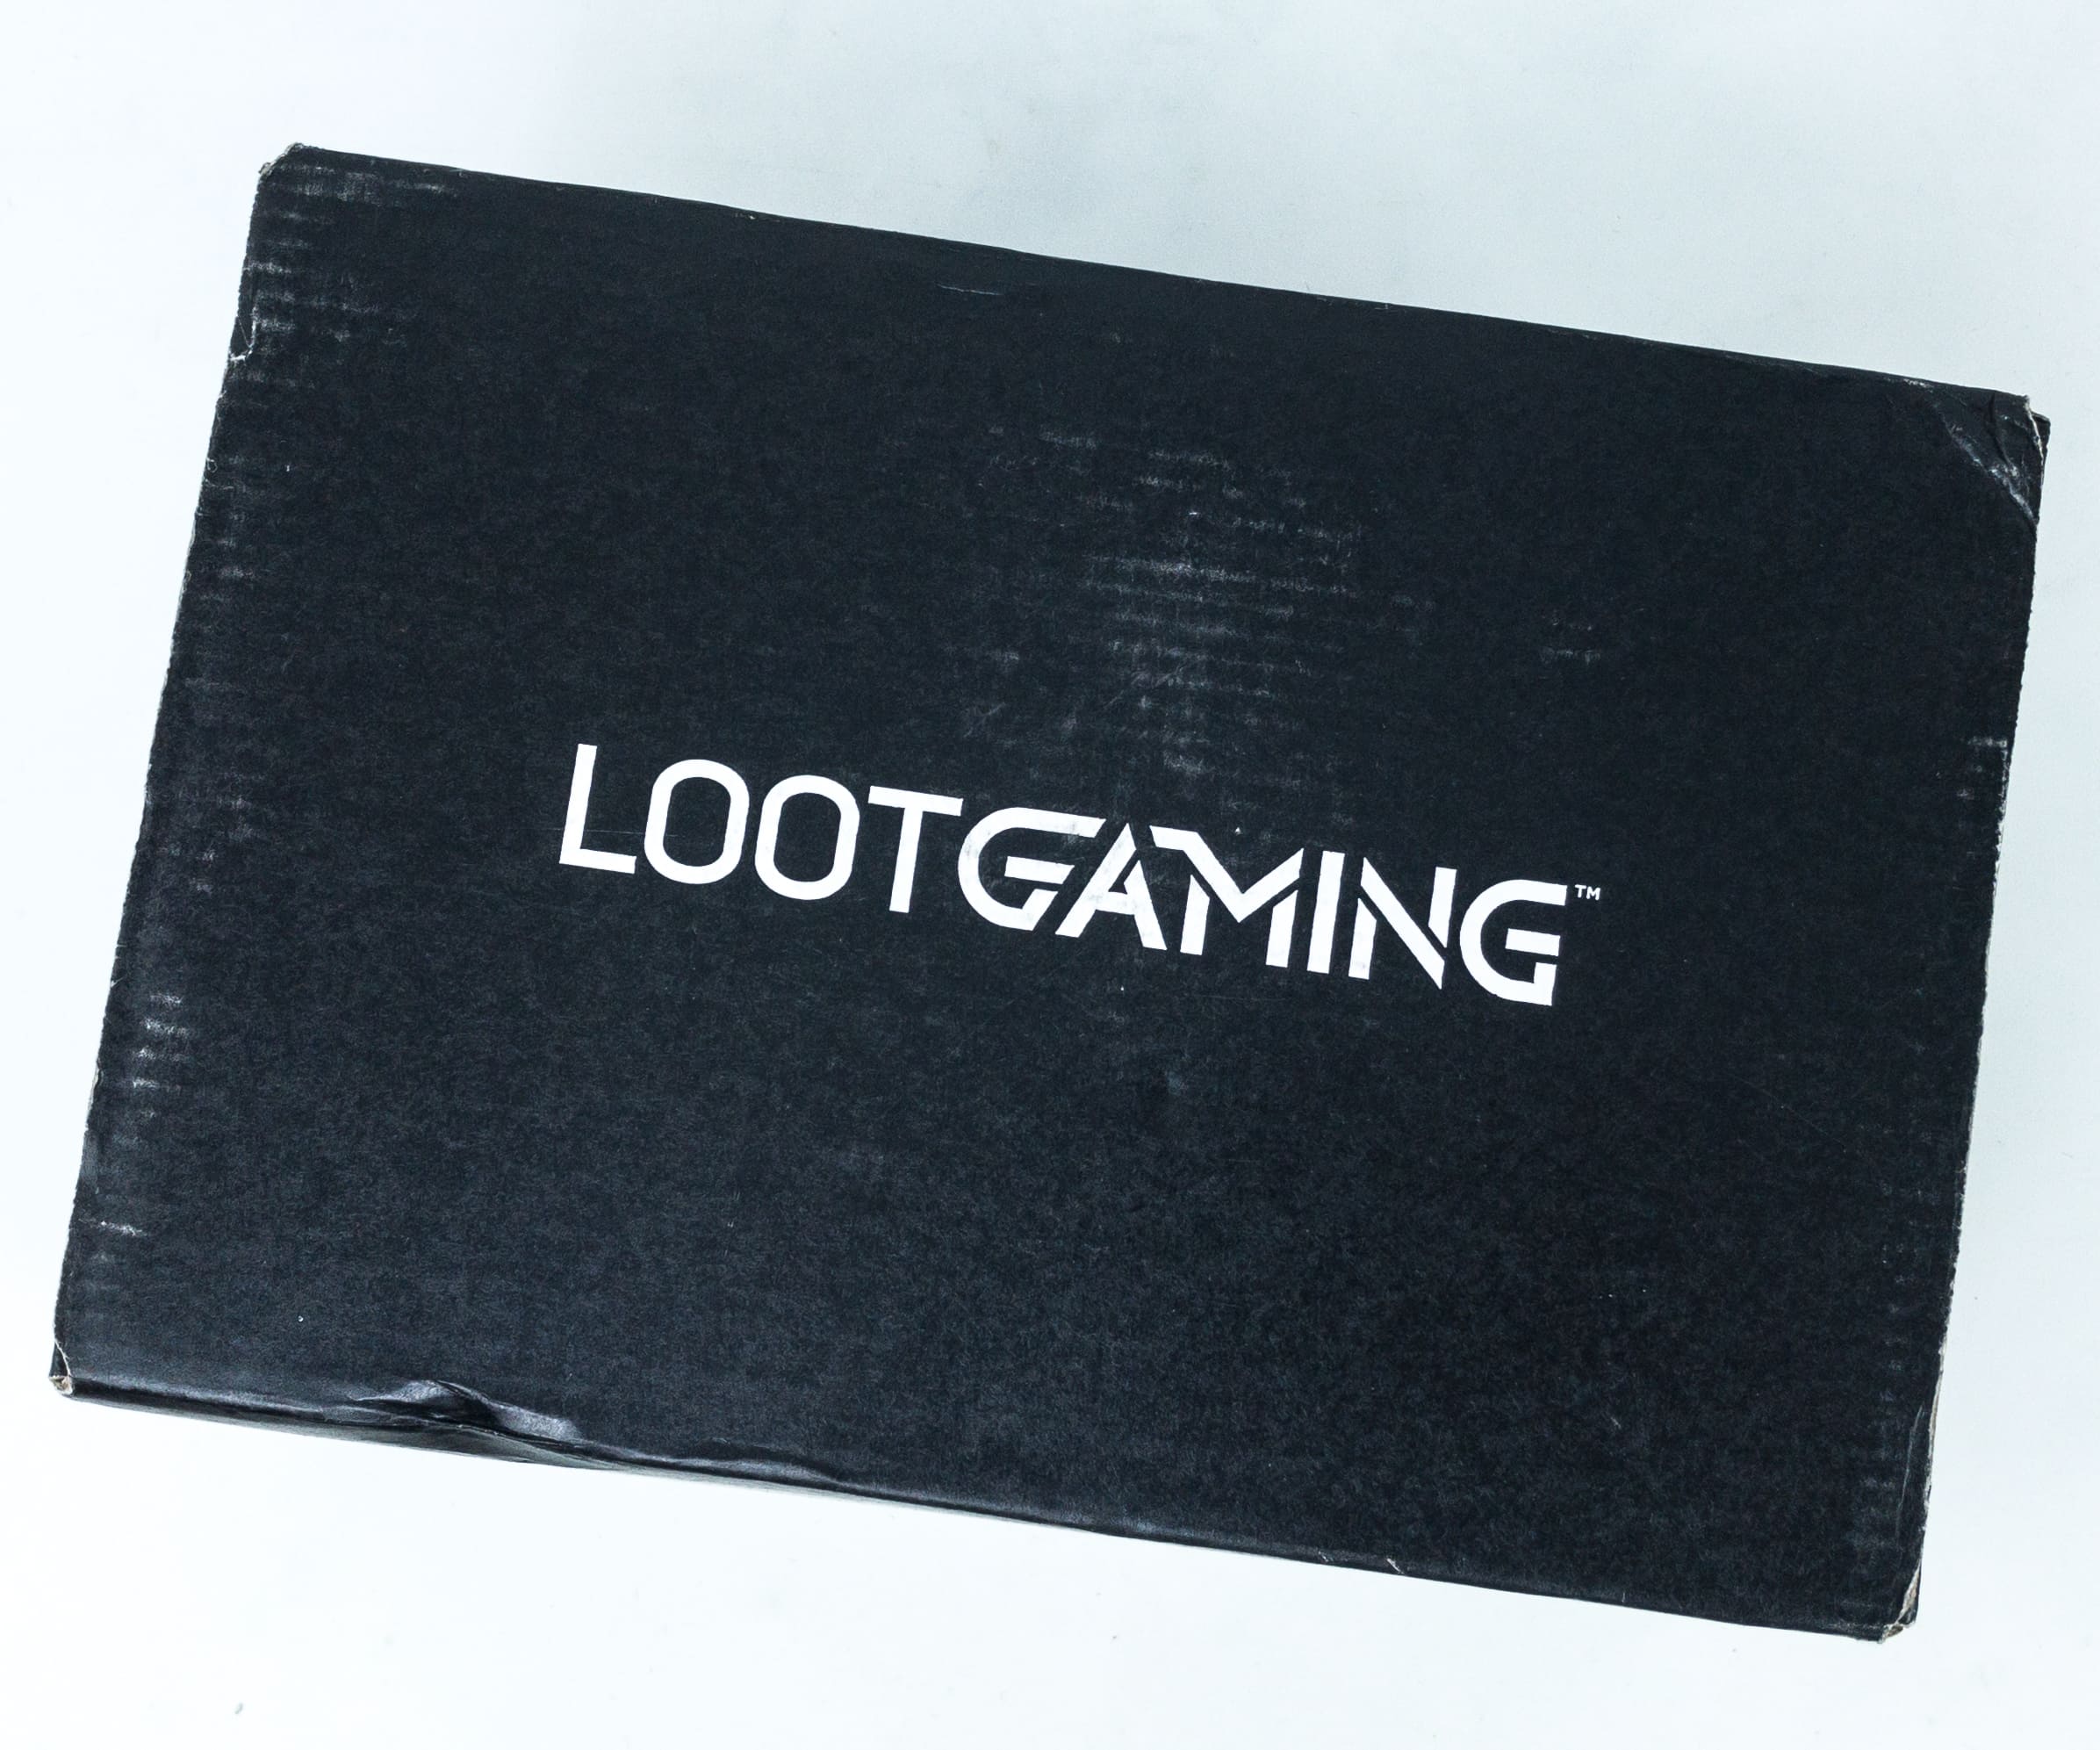 best gaming loot boxes